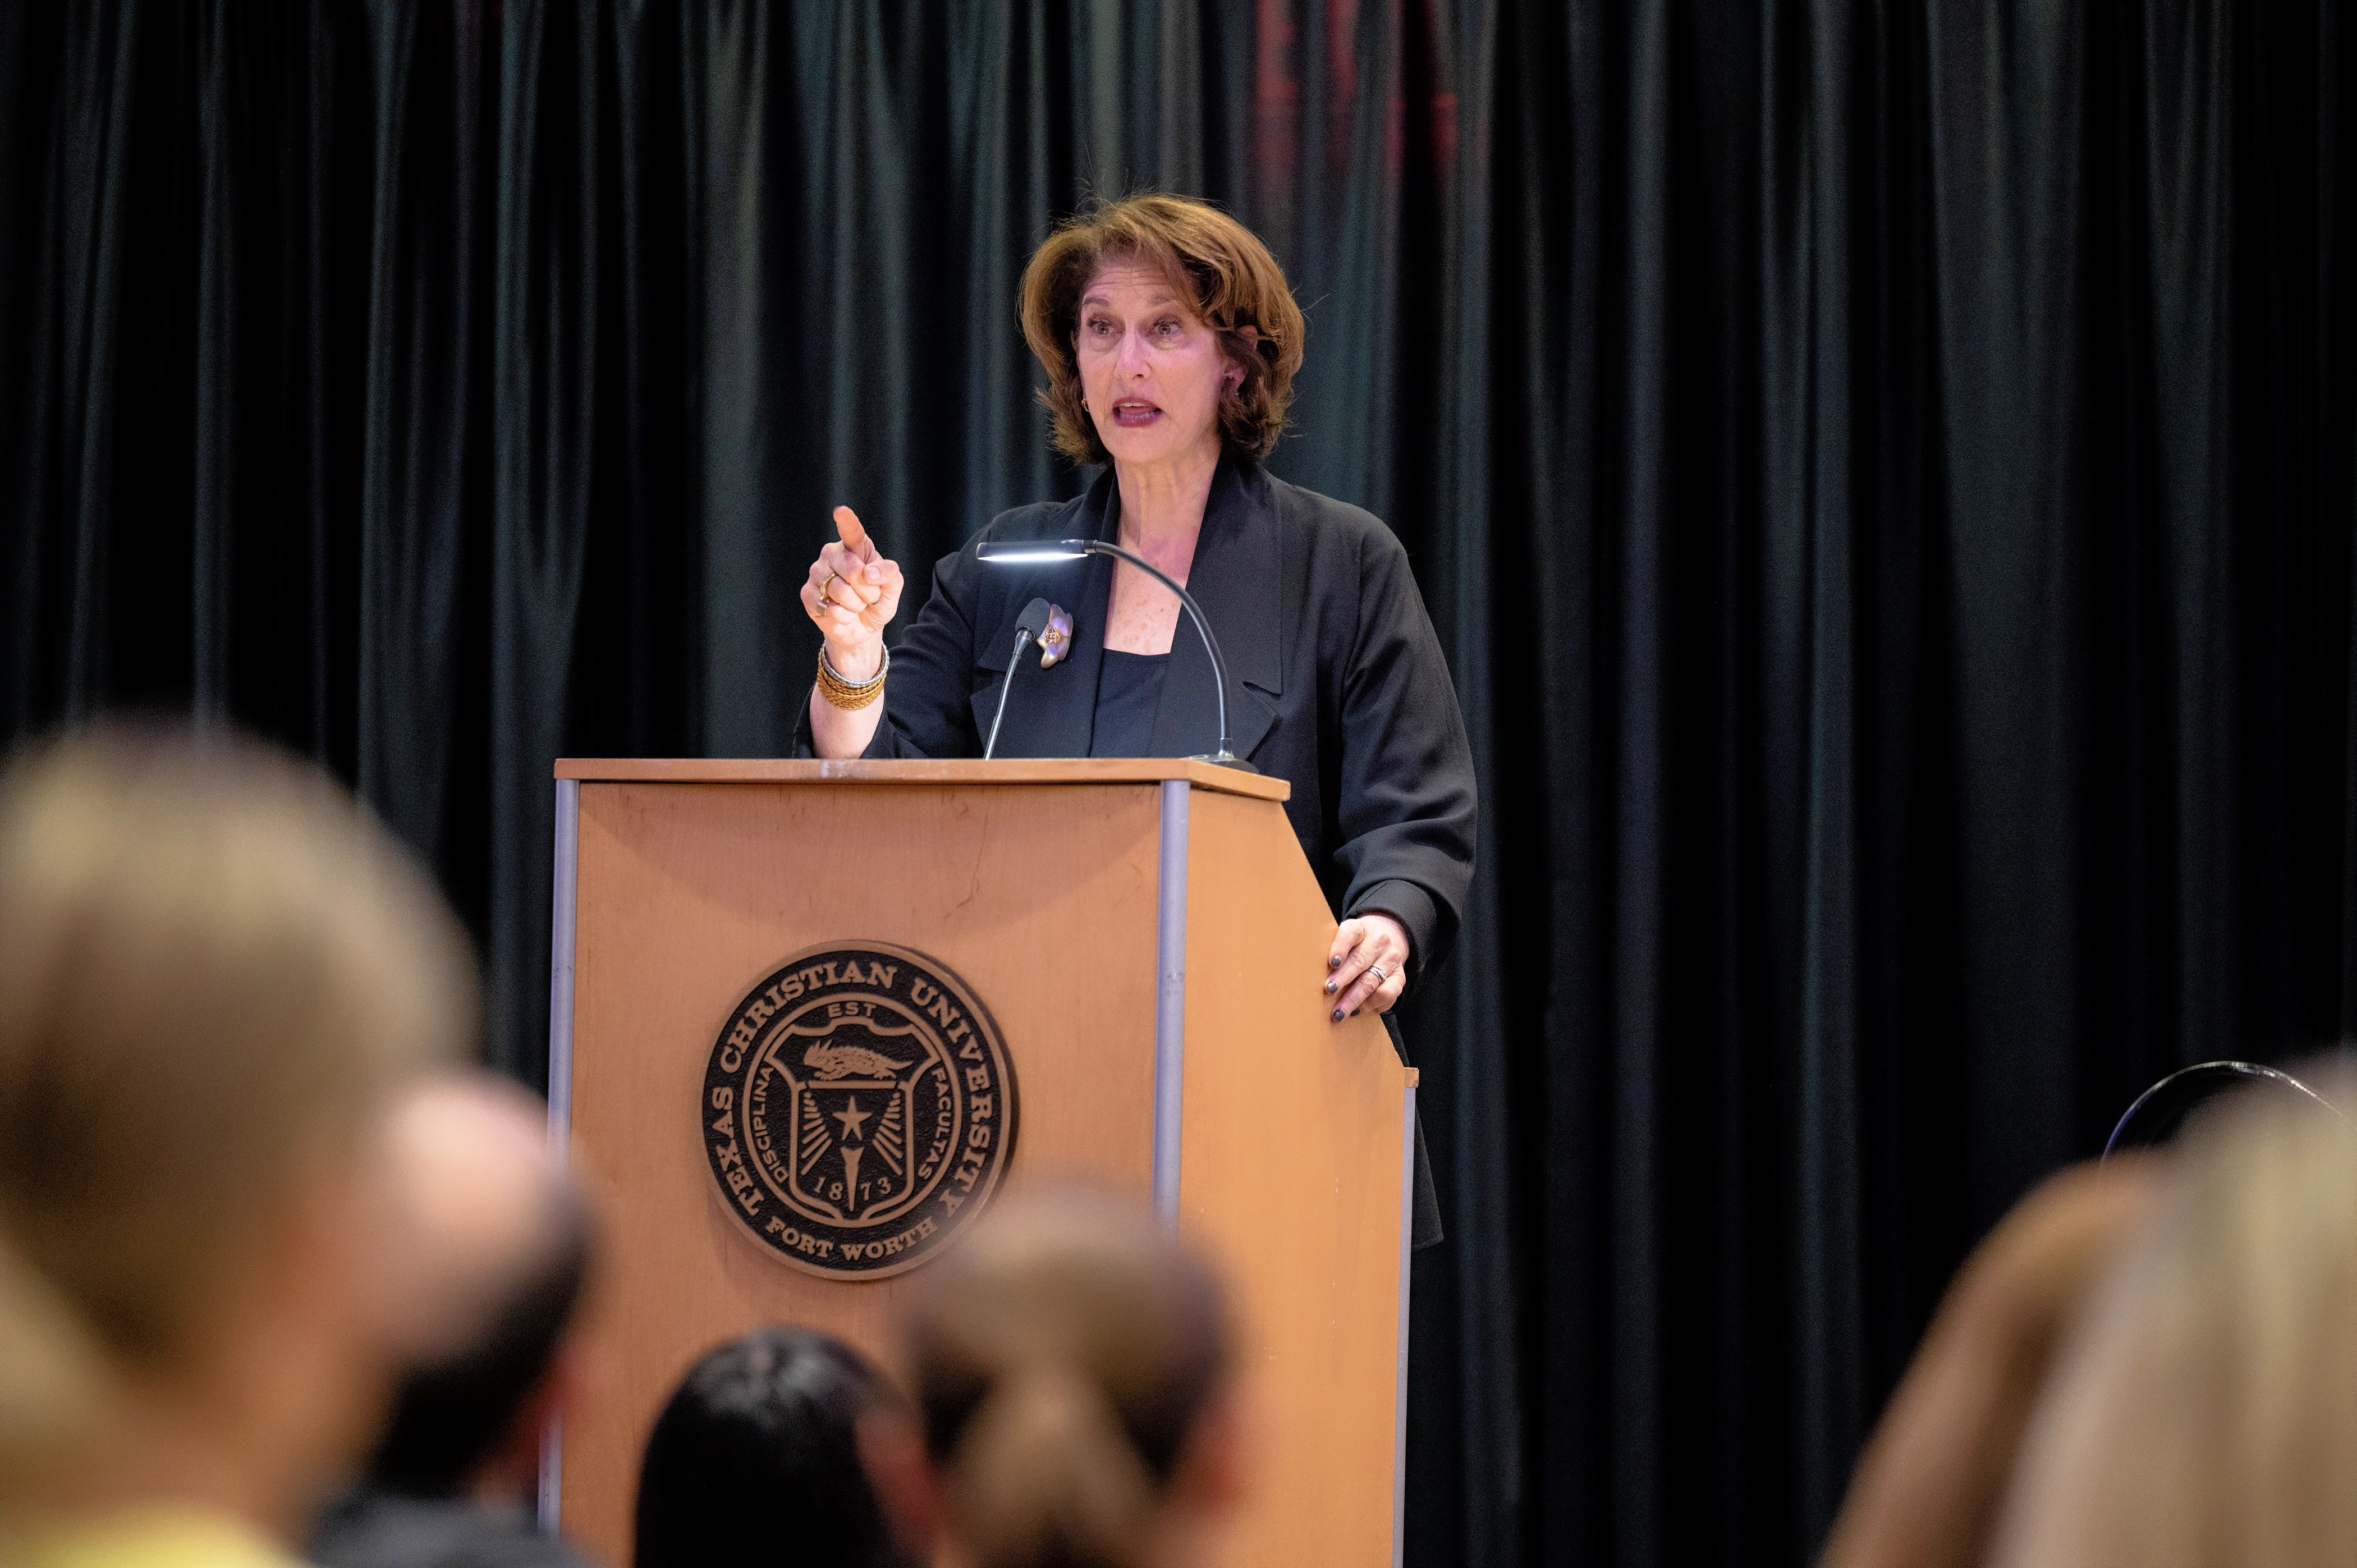 NPR national political correspondent Mara Liasson delivers remarks at the 2022 Robert D. Alexander Lecture